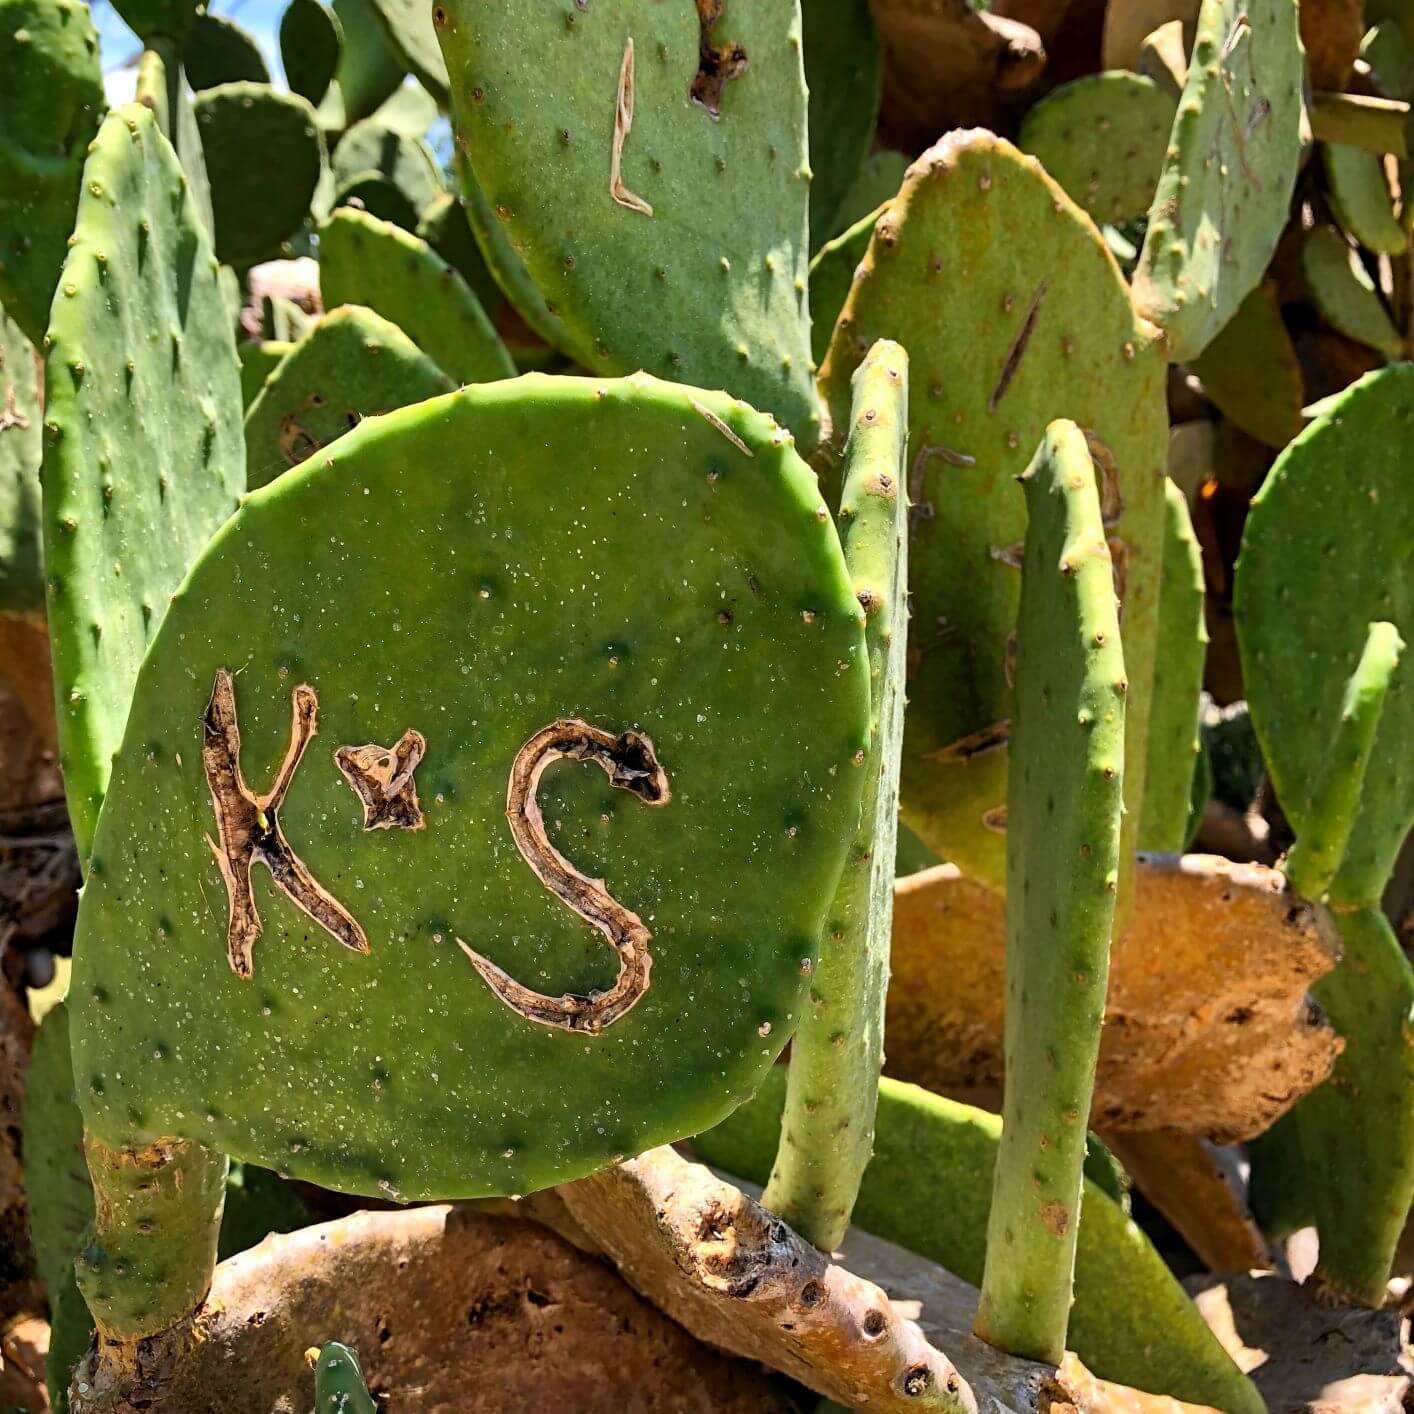 Salado: K&S carved into a cactus along with other love notes